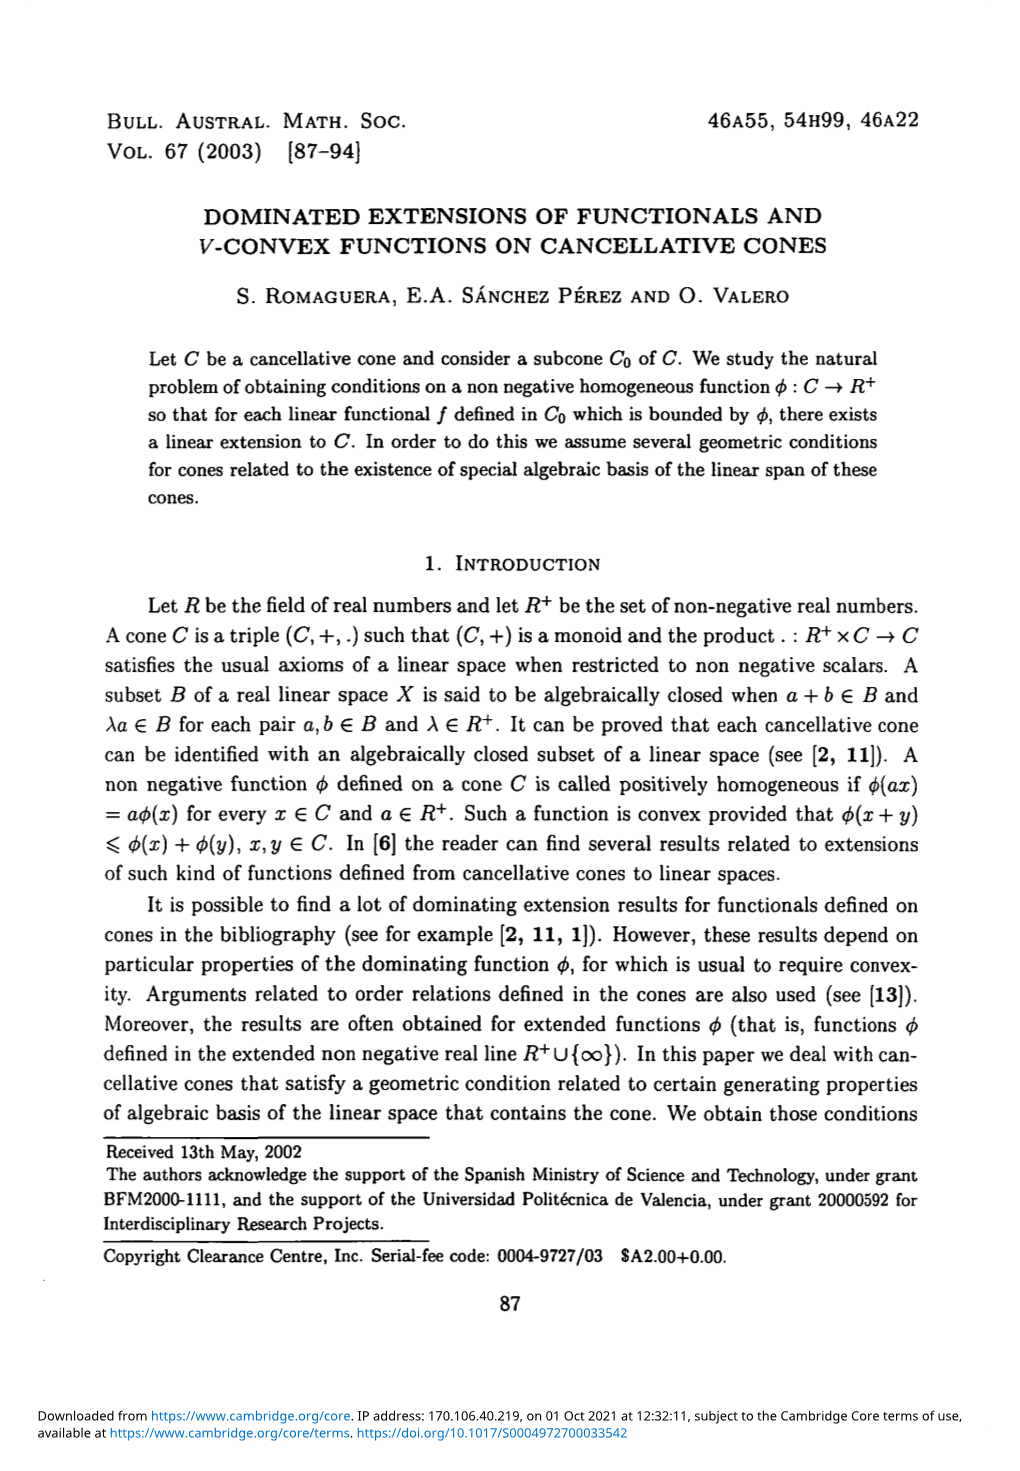 Dominated Extensions of Functionals and V-Convex Functions Of